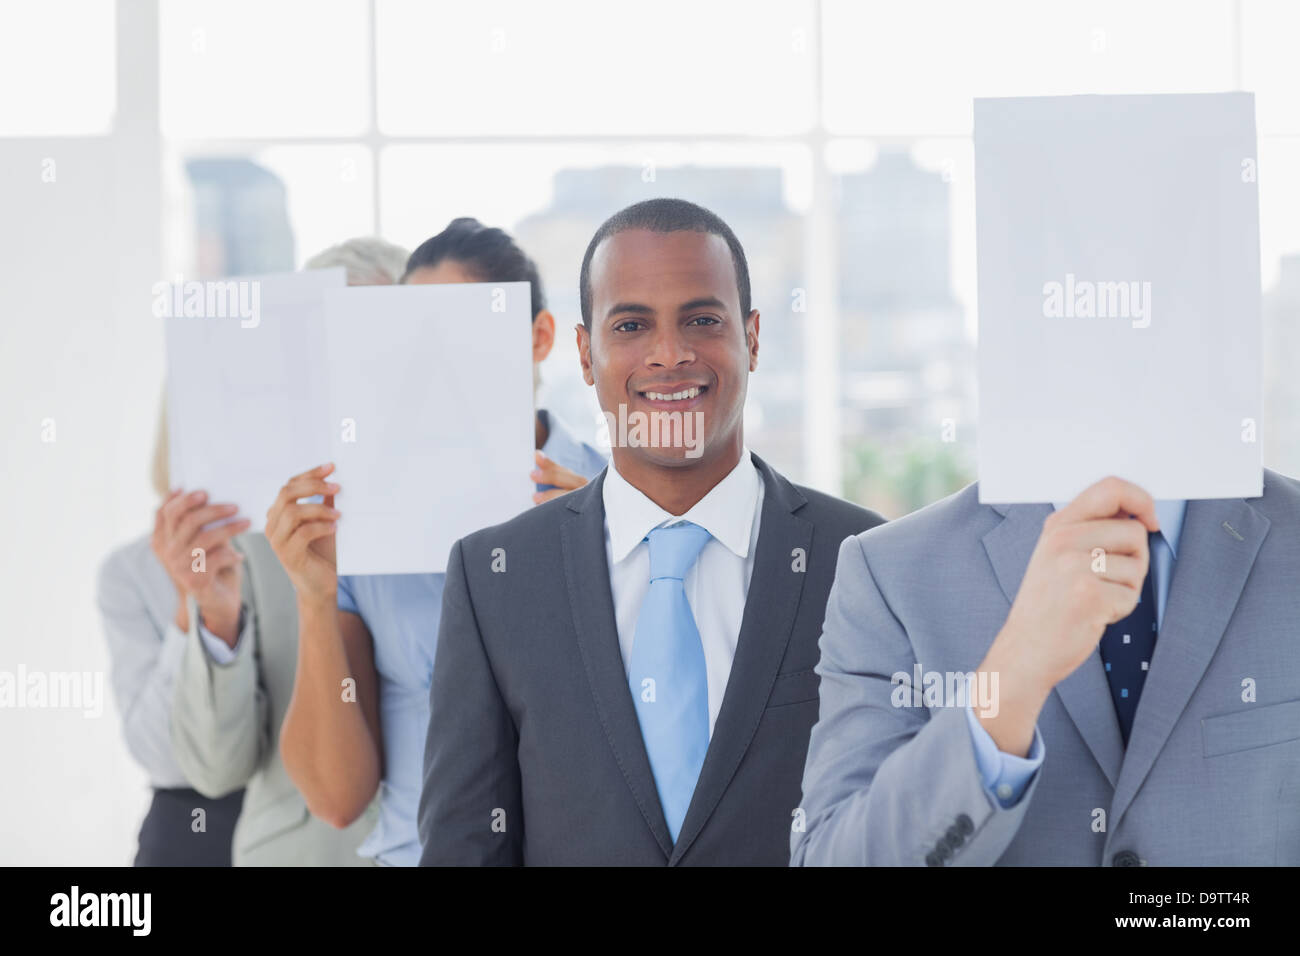 Businessman smiling at camera with colleagues covering faces Stock Photo